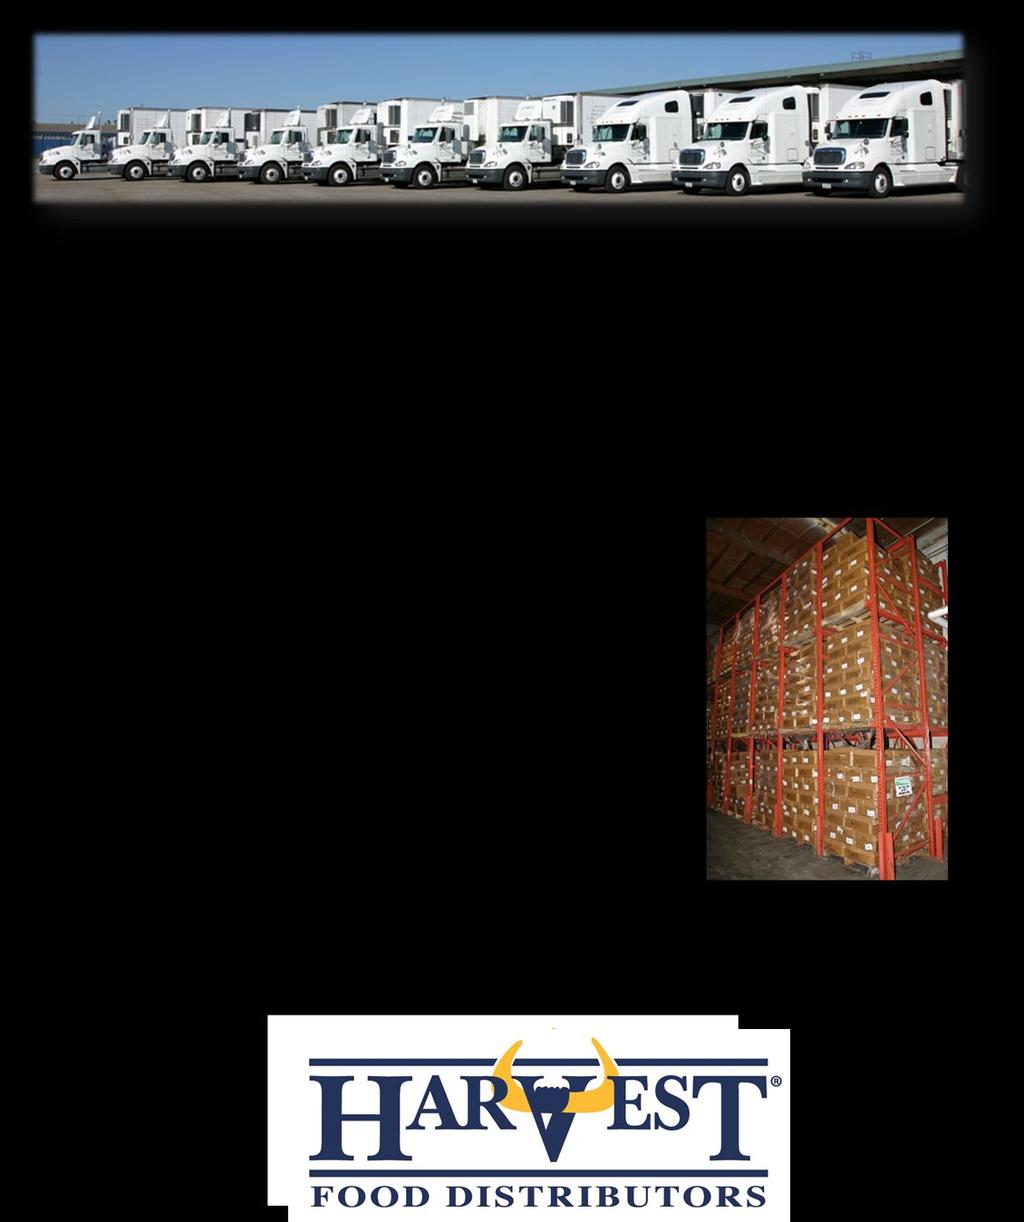 4 Call Toll Free - 1-866-318-6328 Harvest Food Distributors Corporate Overview A Solid Infrastructure Specialized full line distributor. Top ten meat distributor in the U.S. Nationwide refrigerated and dry warehouse locations Professional and knowledgeable sales people & buyers.